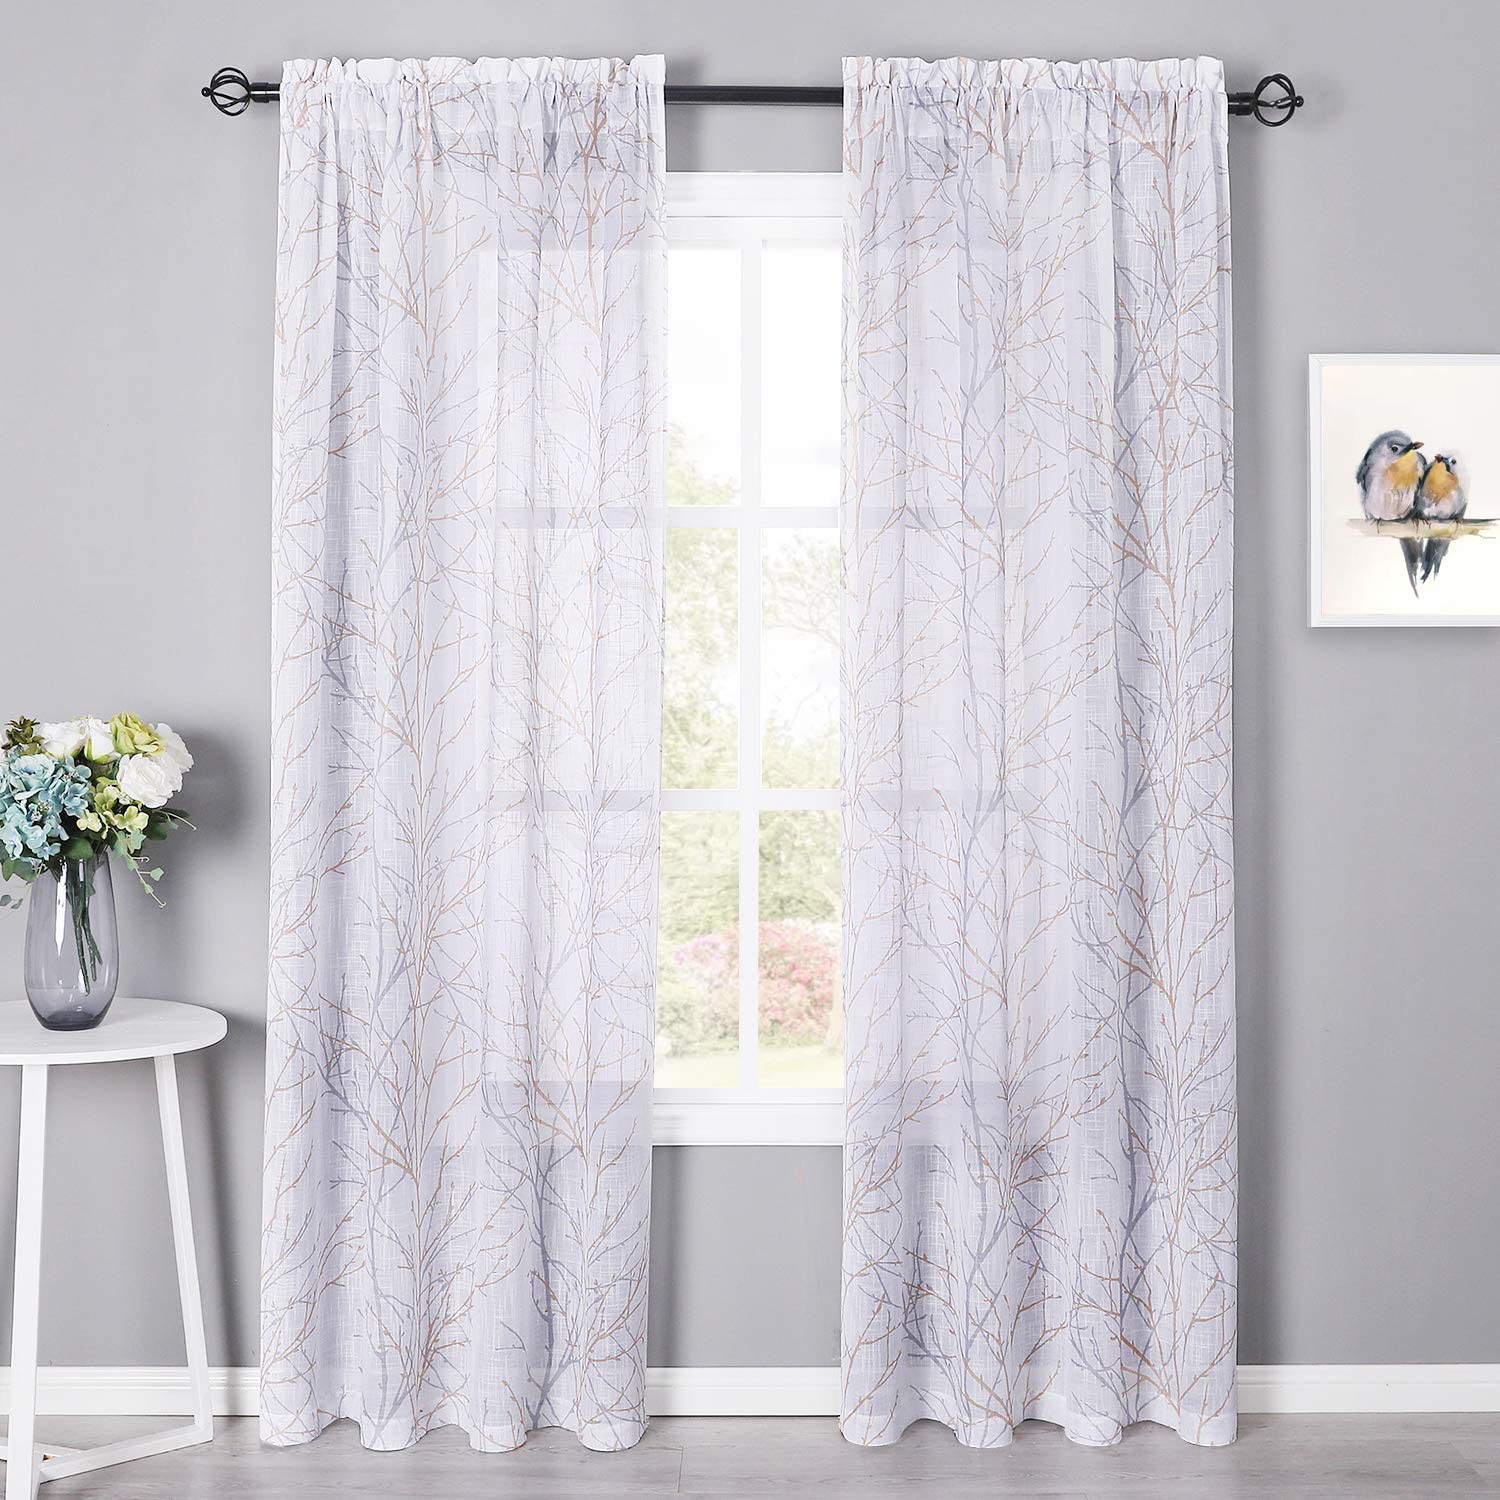 Dual Rod Pocket Sheer Privacy Print Faux Linen White Curtains For Bedroom 2 Panels KGORGE Store